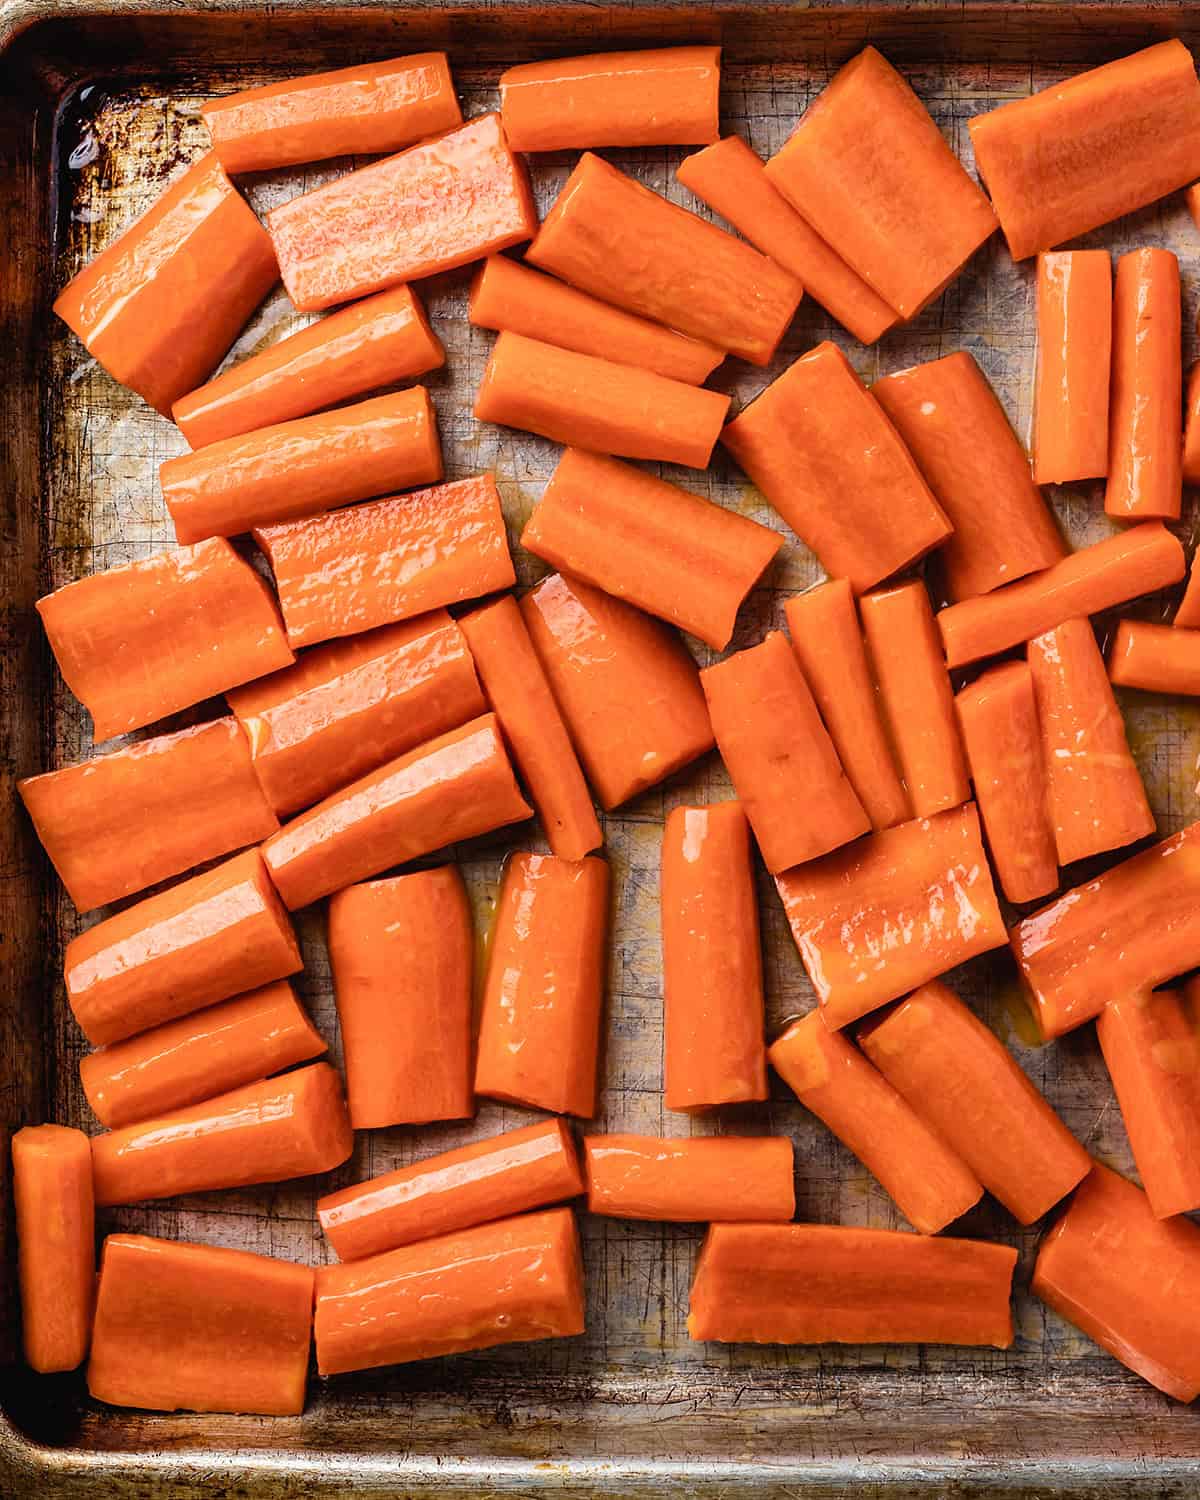 How to Make Baby Food Carrots  - carrots on a baking sheet before roasting